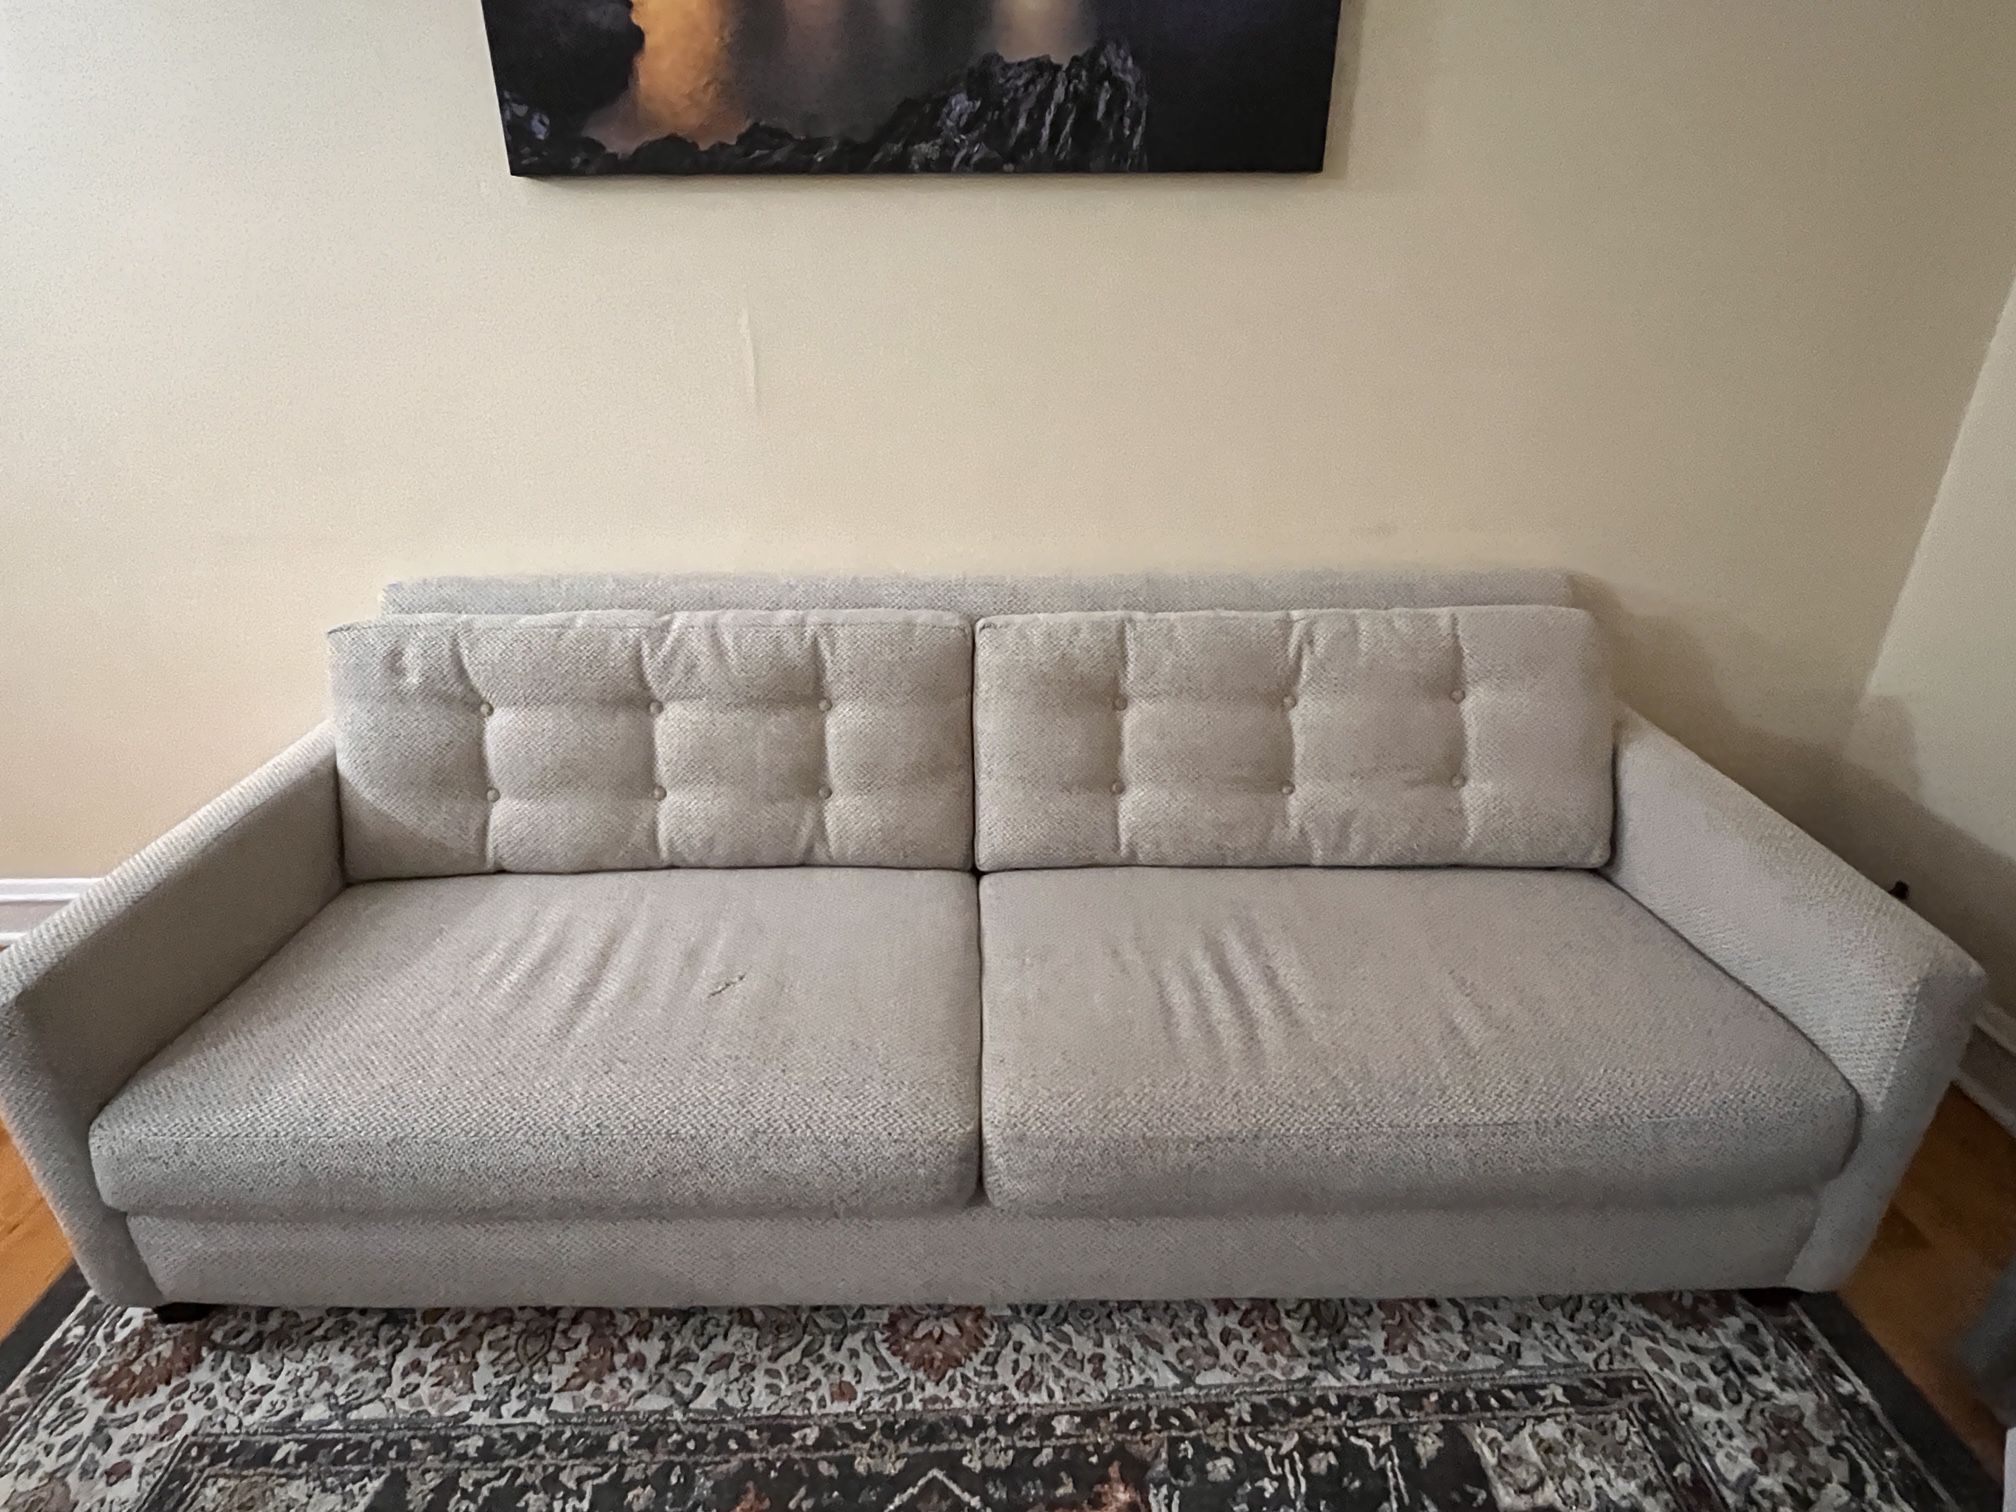 Cheap Couch-sofa. Pick Up Today 50$